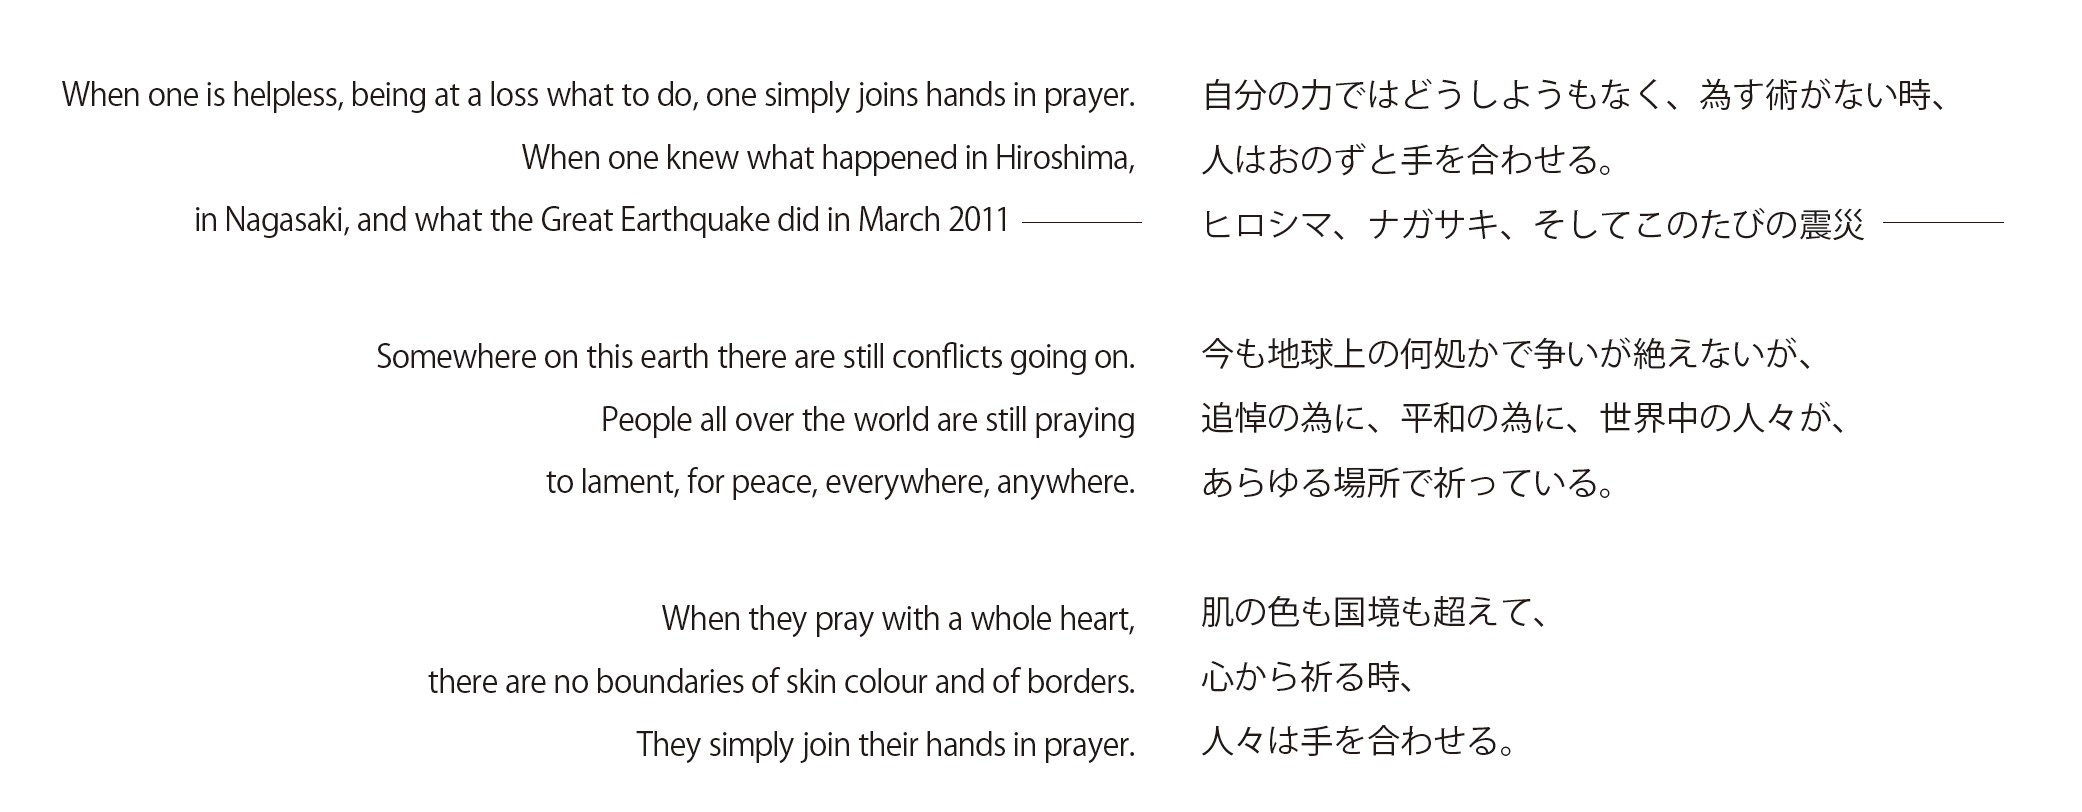 When one is helpless, being at a loss what to do, one simply joins hands in prayer.
When one knew what happened in Hiroshima, in Nagasaki, and what the Great Earthquake did in March 2011

Somewhere on this earth there are still conflicts going on.
People all over the world are still praying to lament, for peace, everywhere, anywhere.

When they pray with a whole heart, there are no boundaries of skin colour and of borders.
They simply join their hands in prayer. 